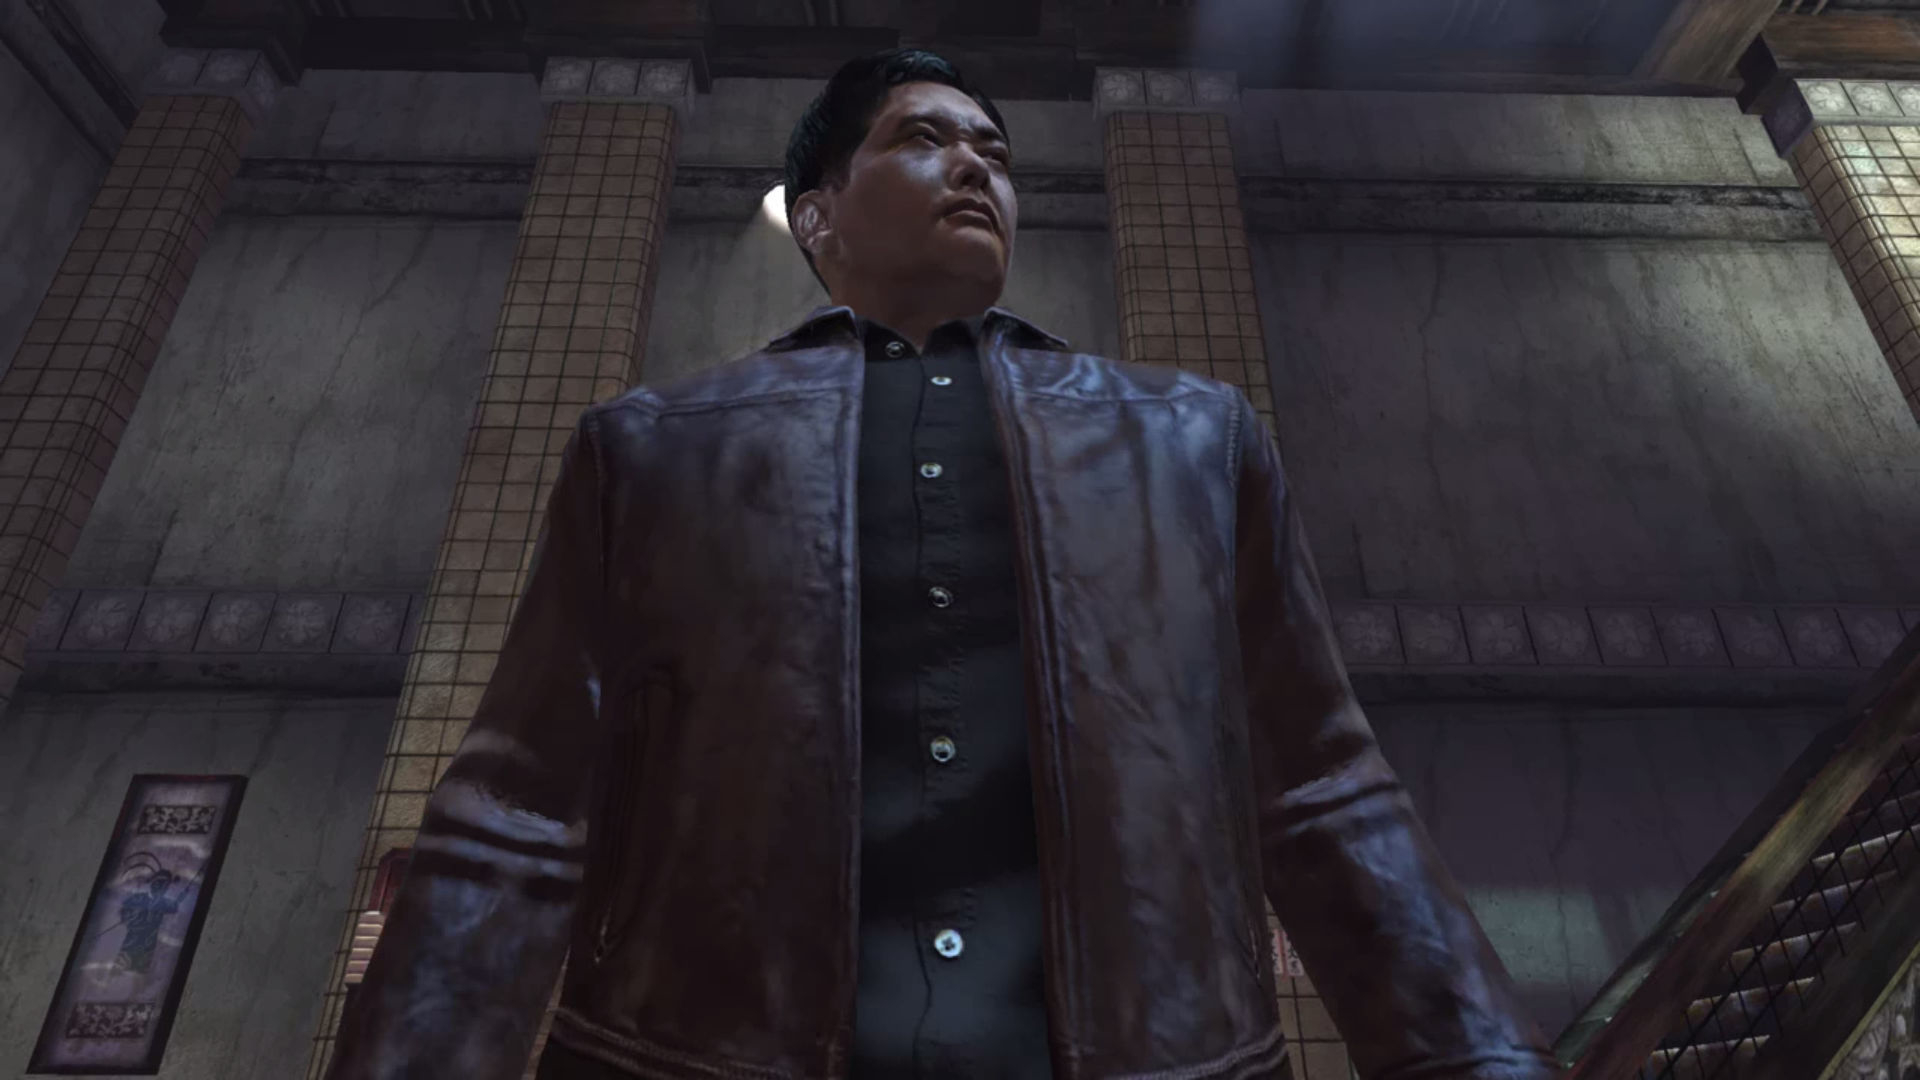 John Woo’s First And Only Video Game, Stranglehold, Available On PC Again Thanks To GOG